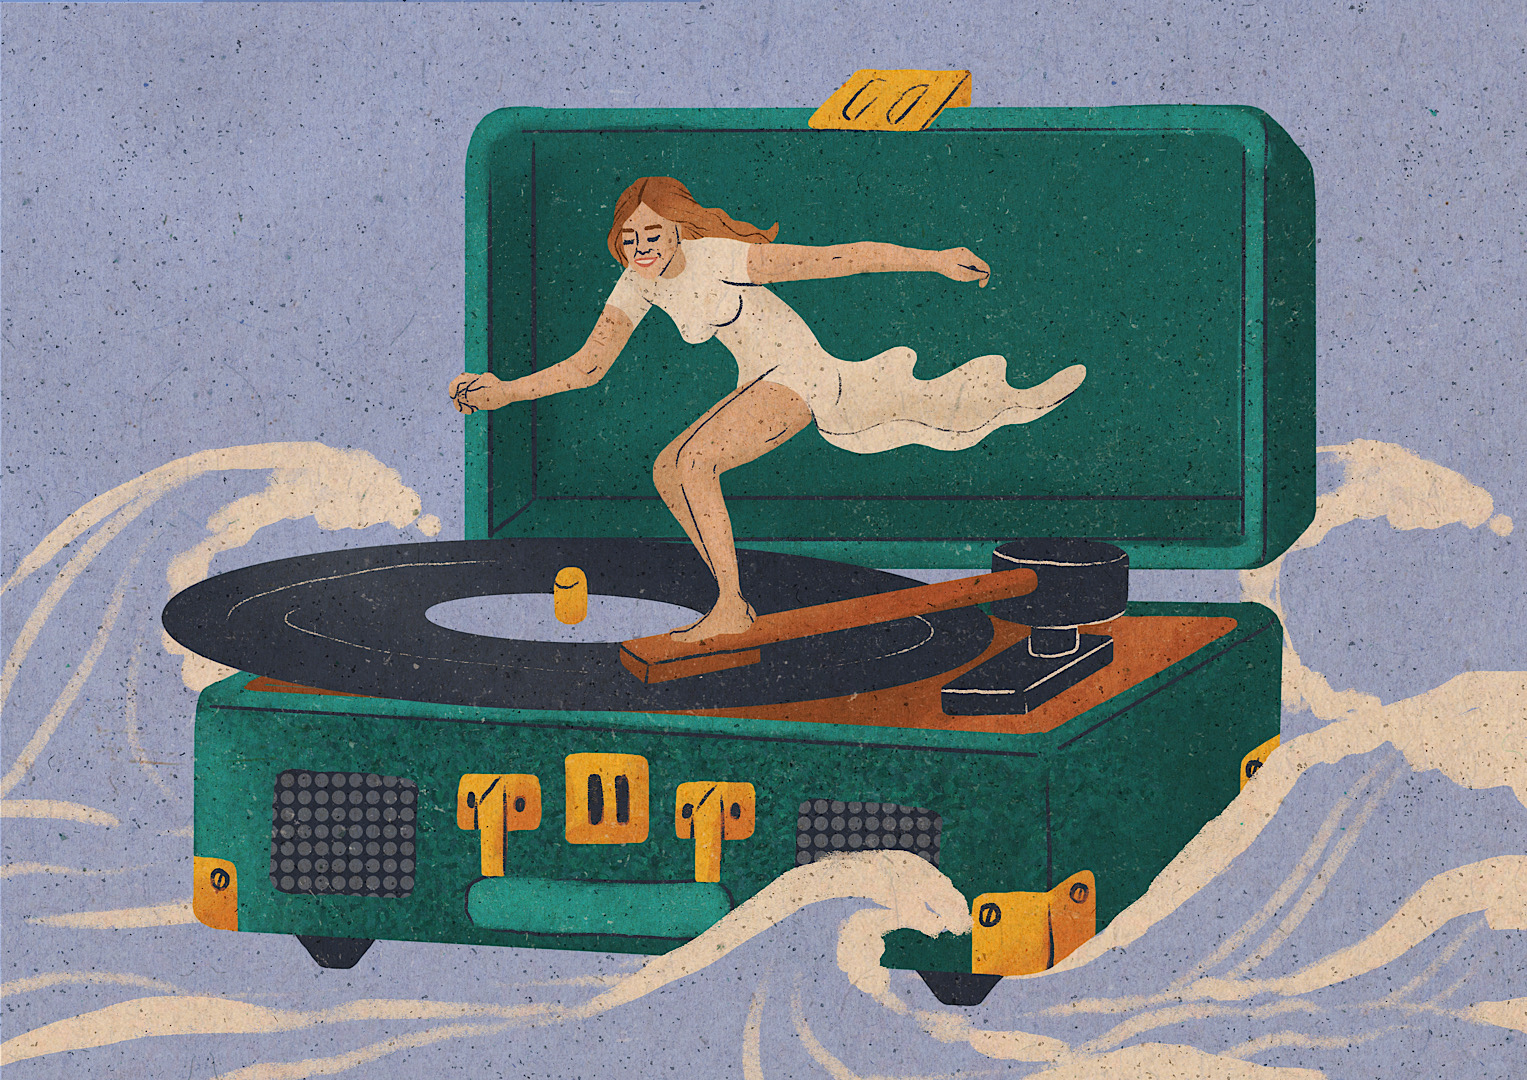 A woman is surfing on a vinyl record player ride the waves of life eve pyra